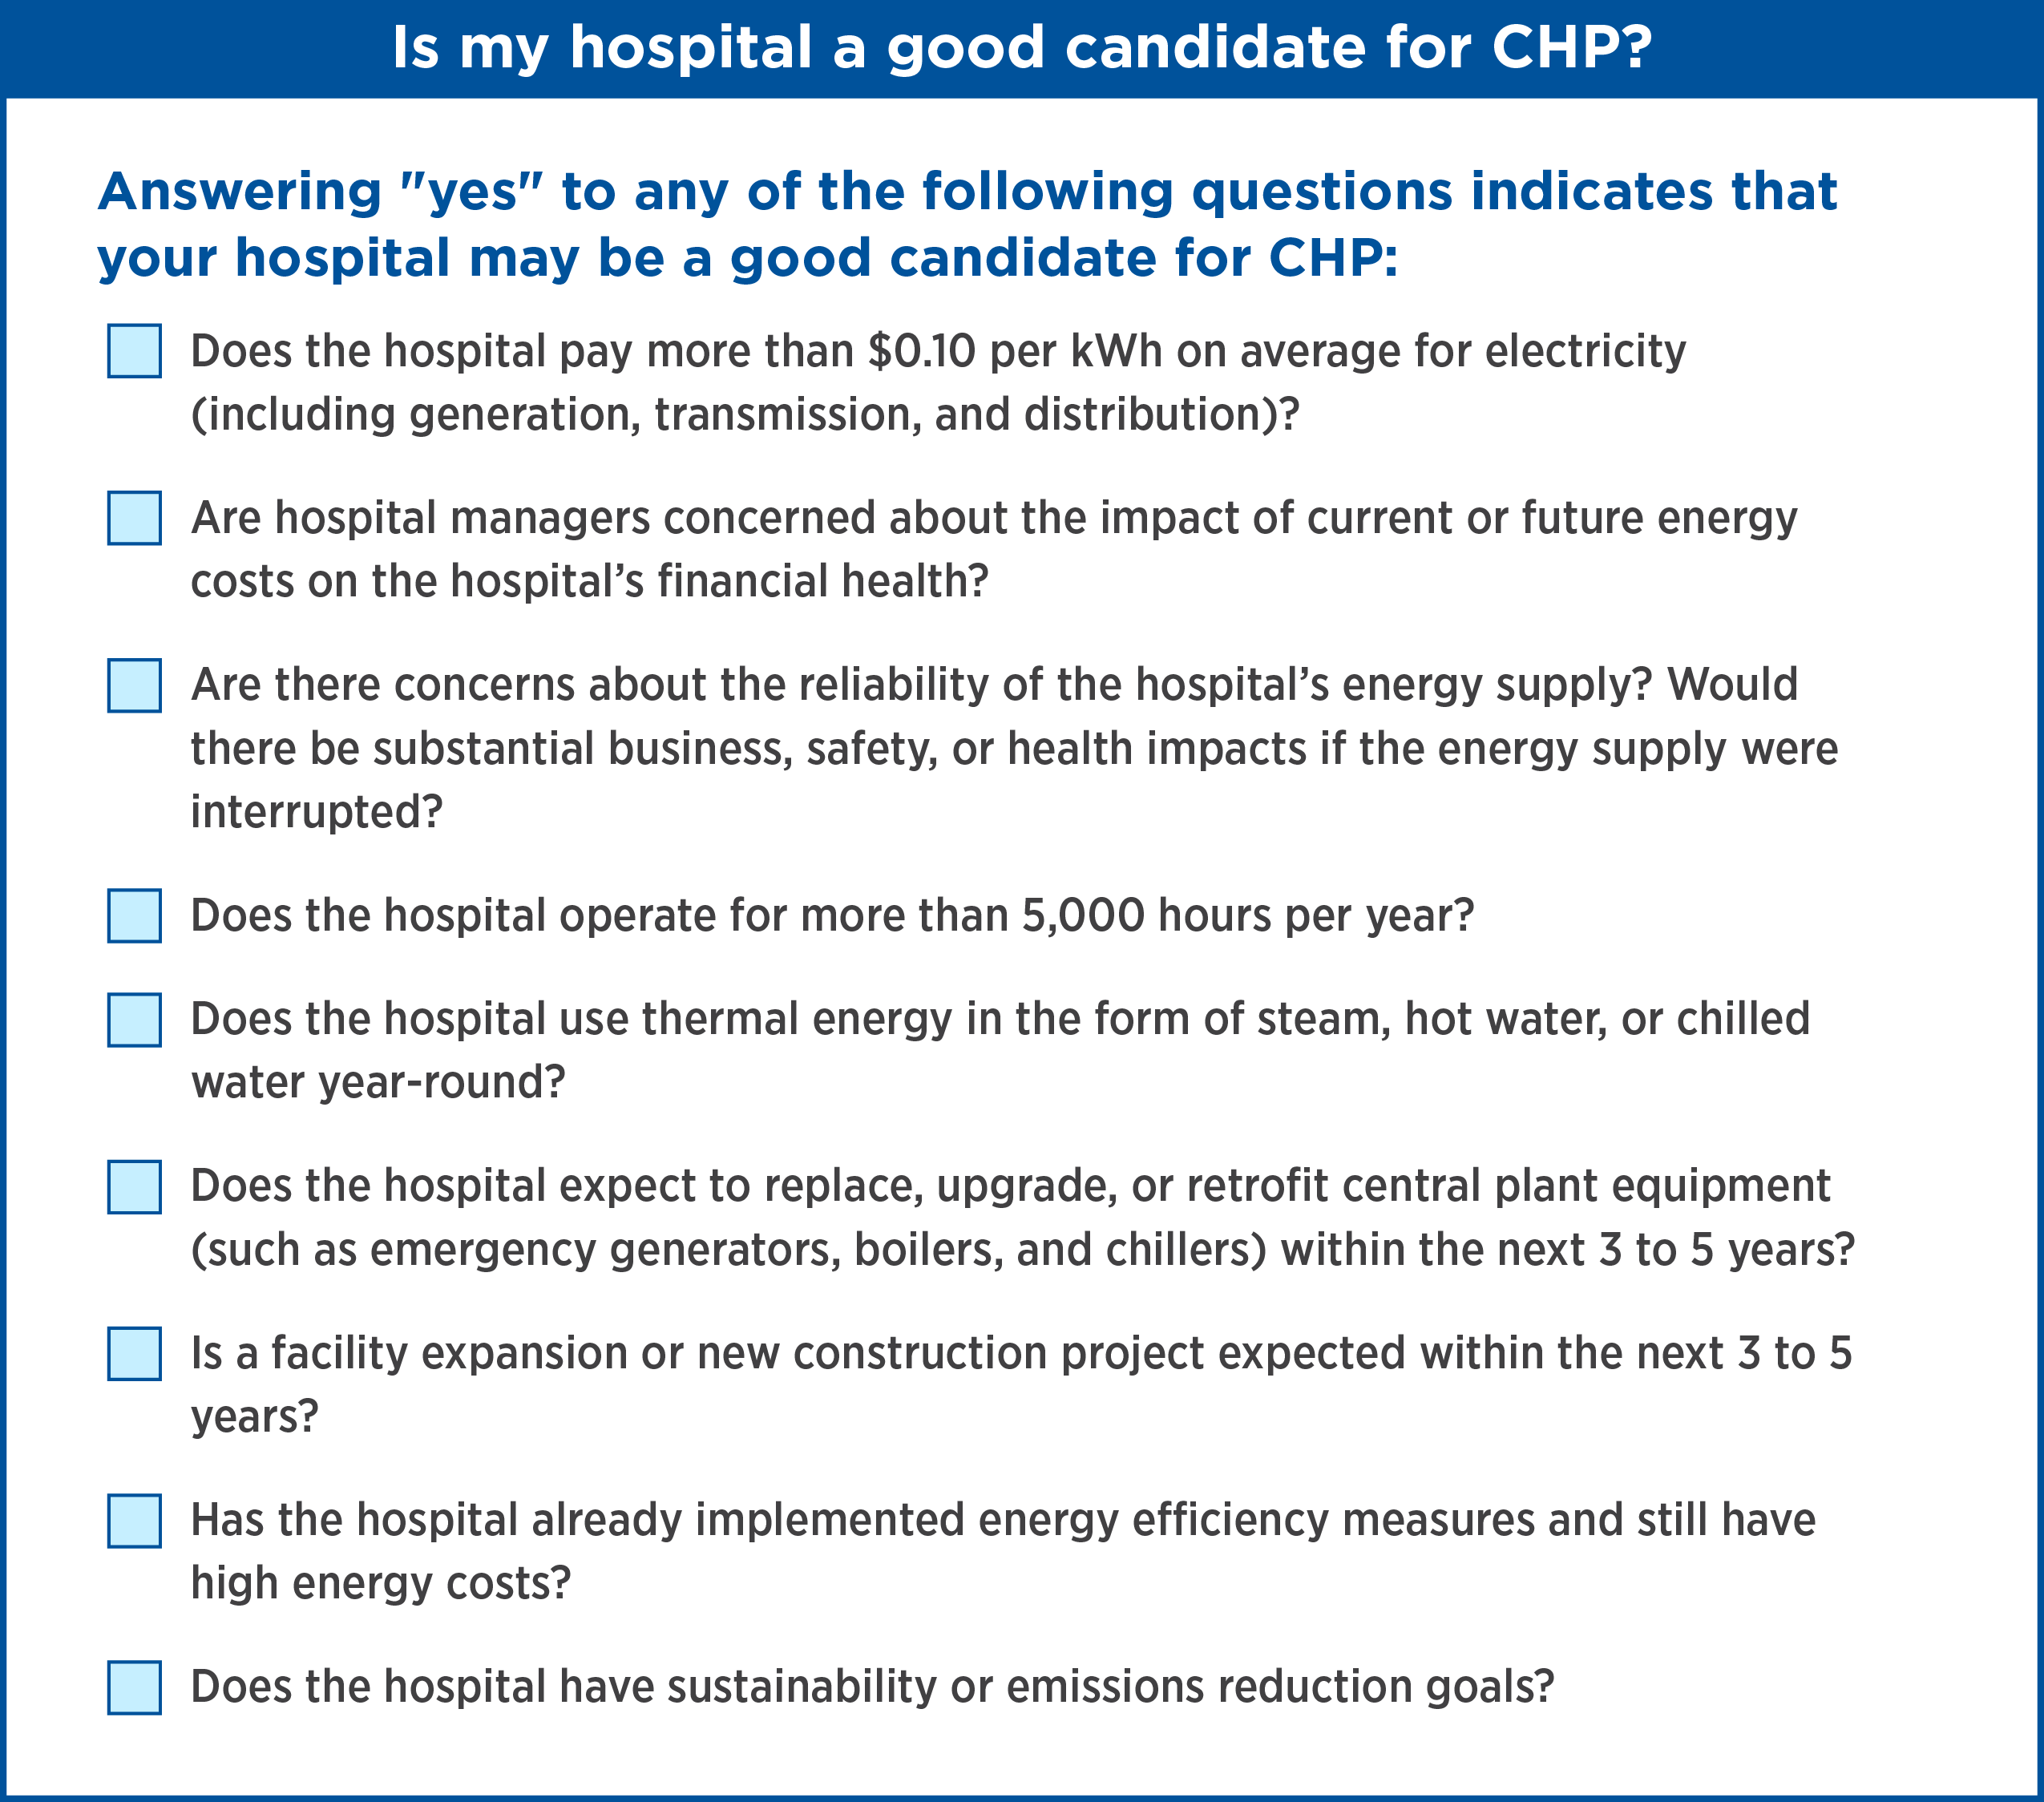 Is my hospital a good candidate for CHP